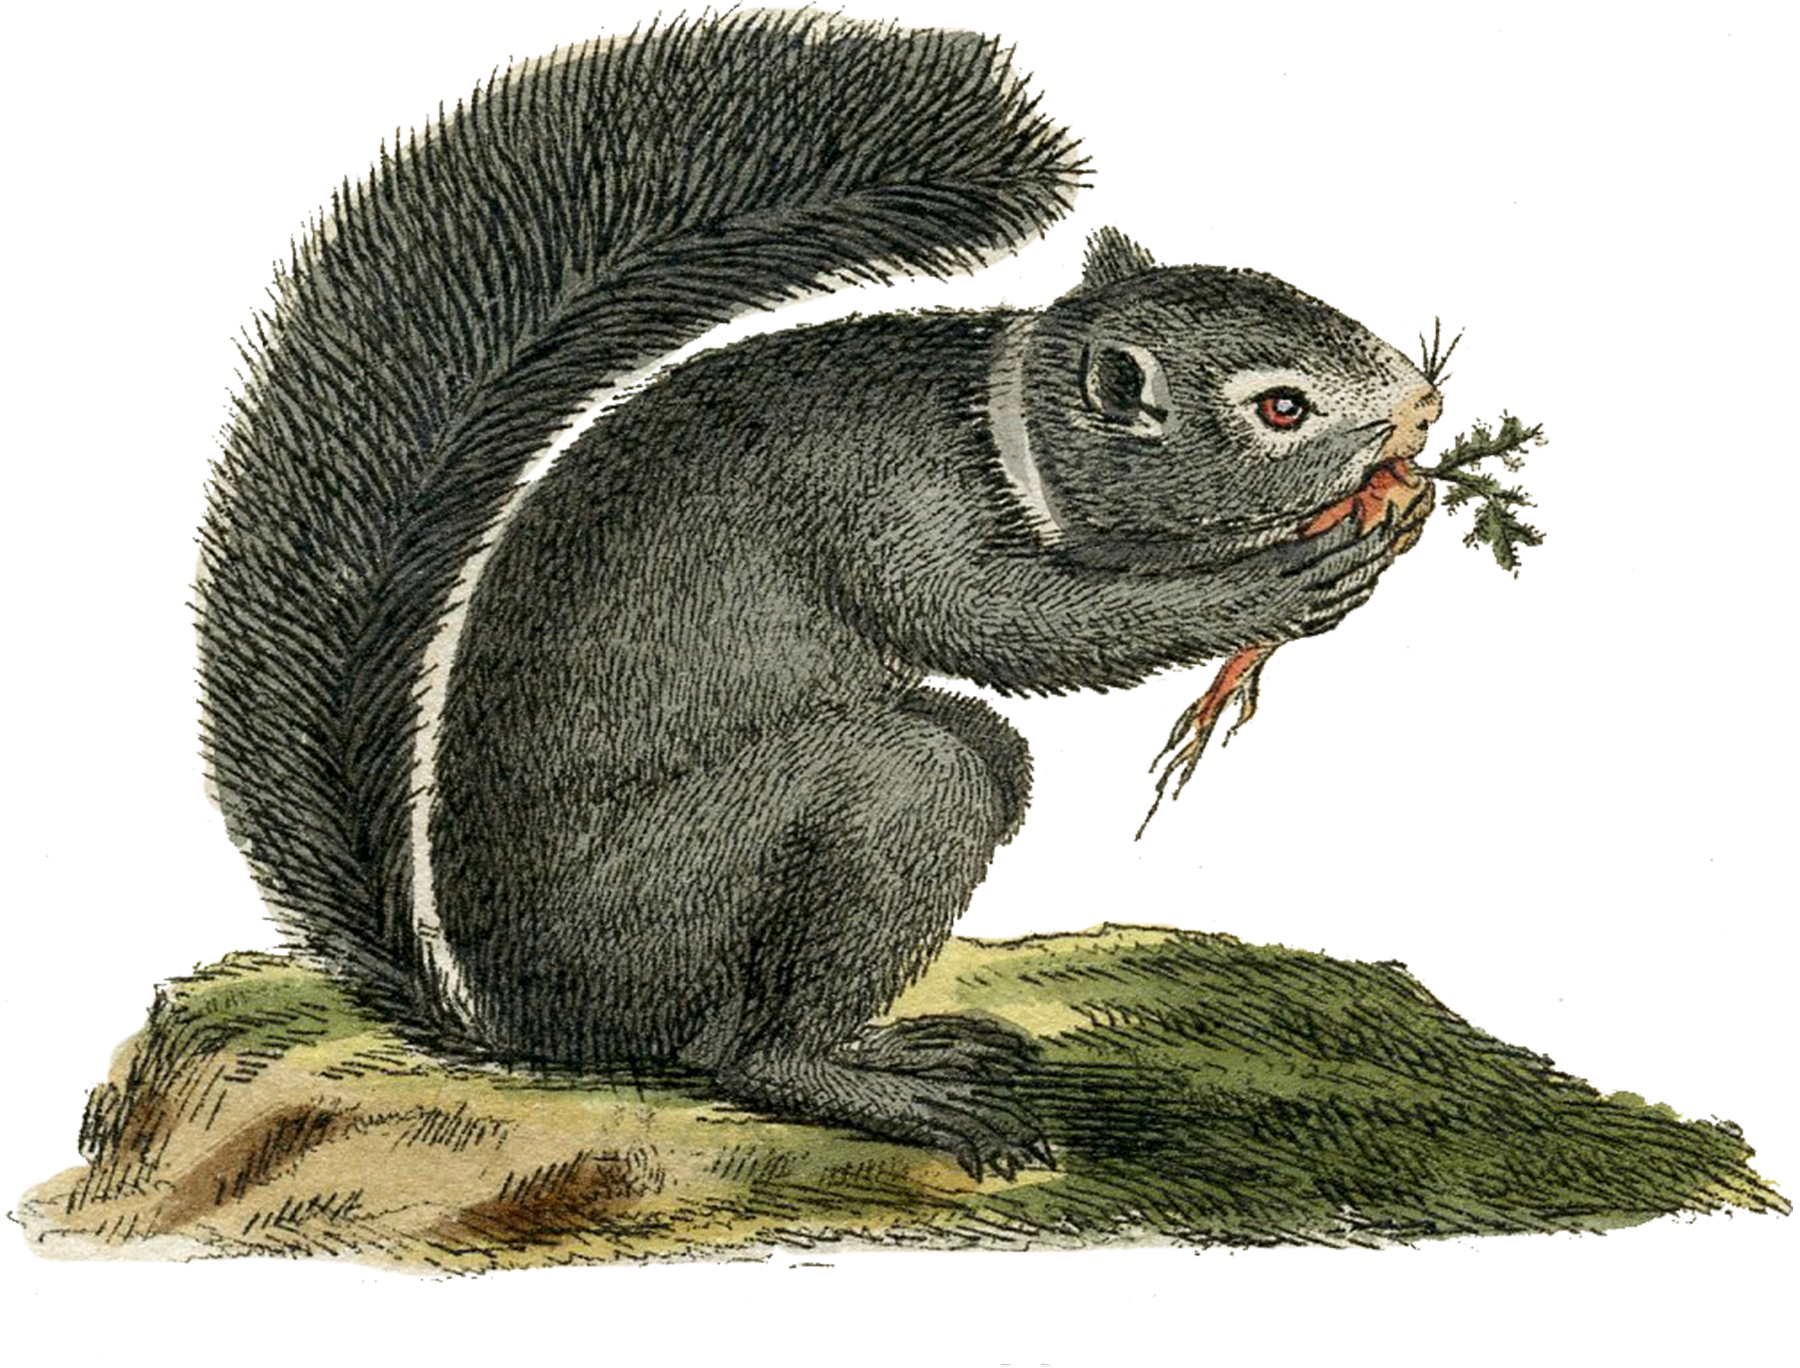 Wonderful Vintage Gray Squirrel Image! - The Graphics Fairy1800 x 1368